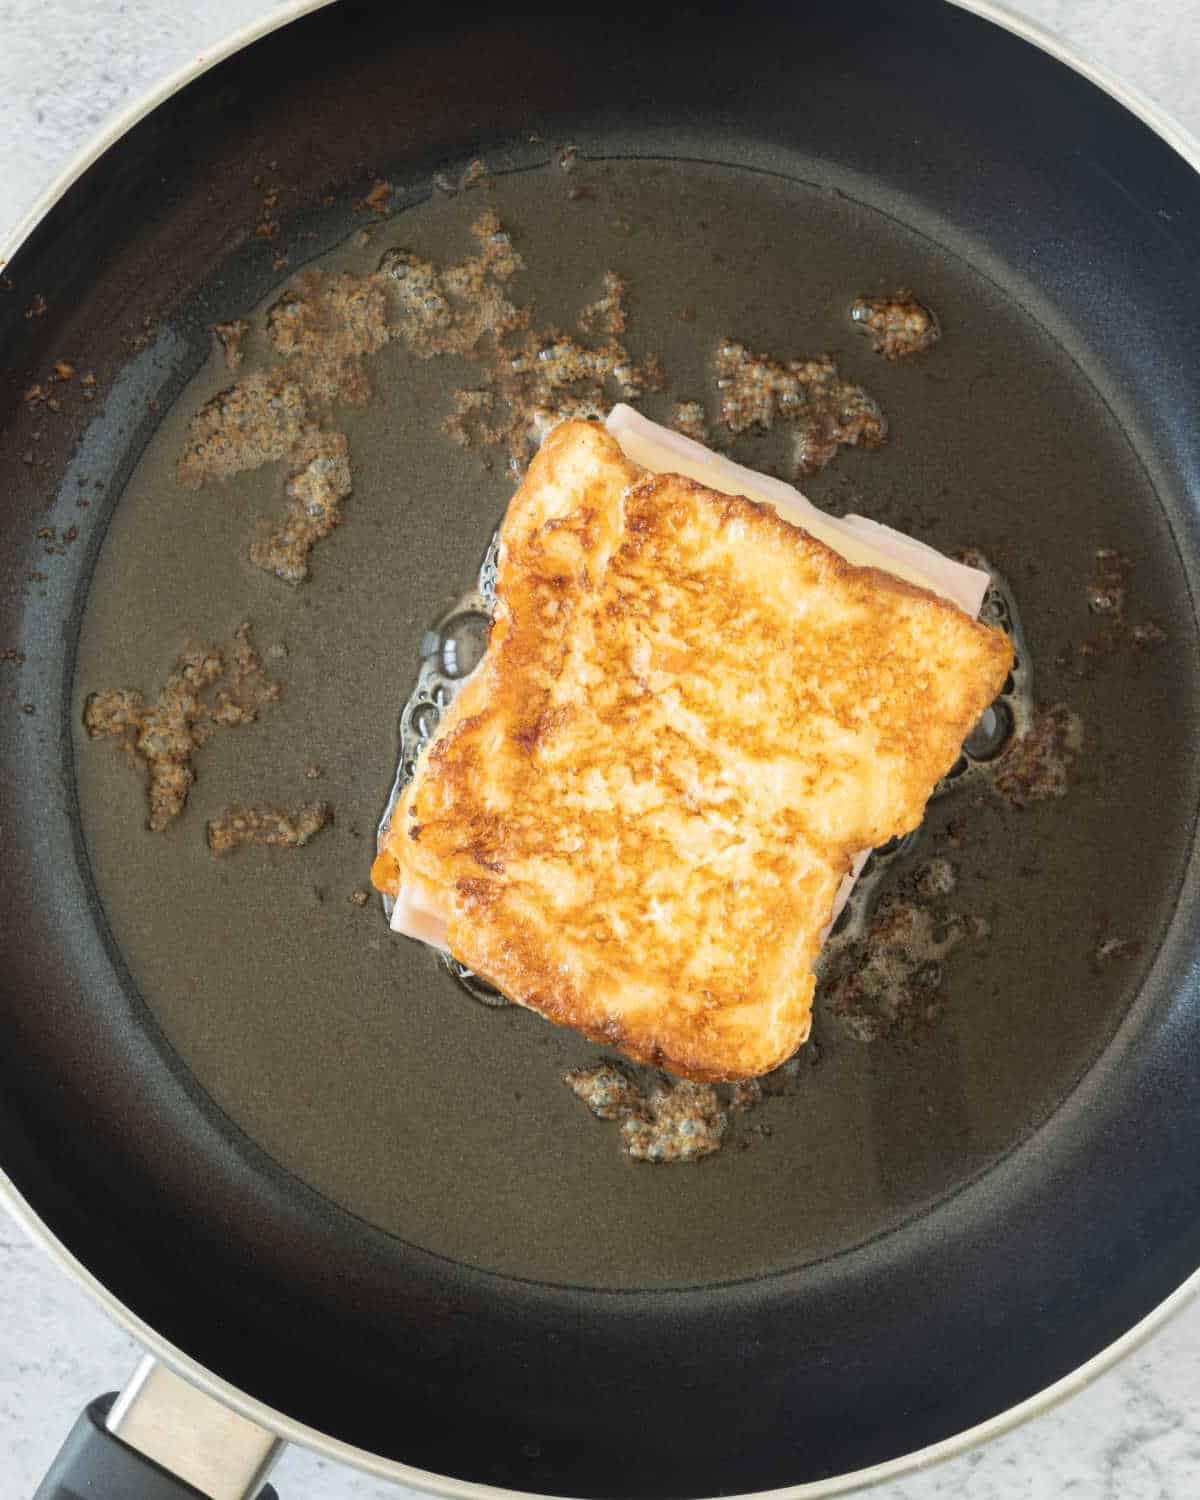 Cooking a ham and cheese French toast sandwich on a black skillet.